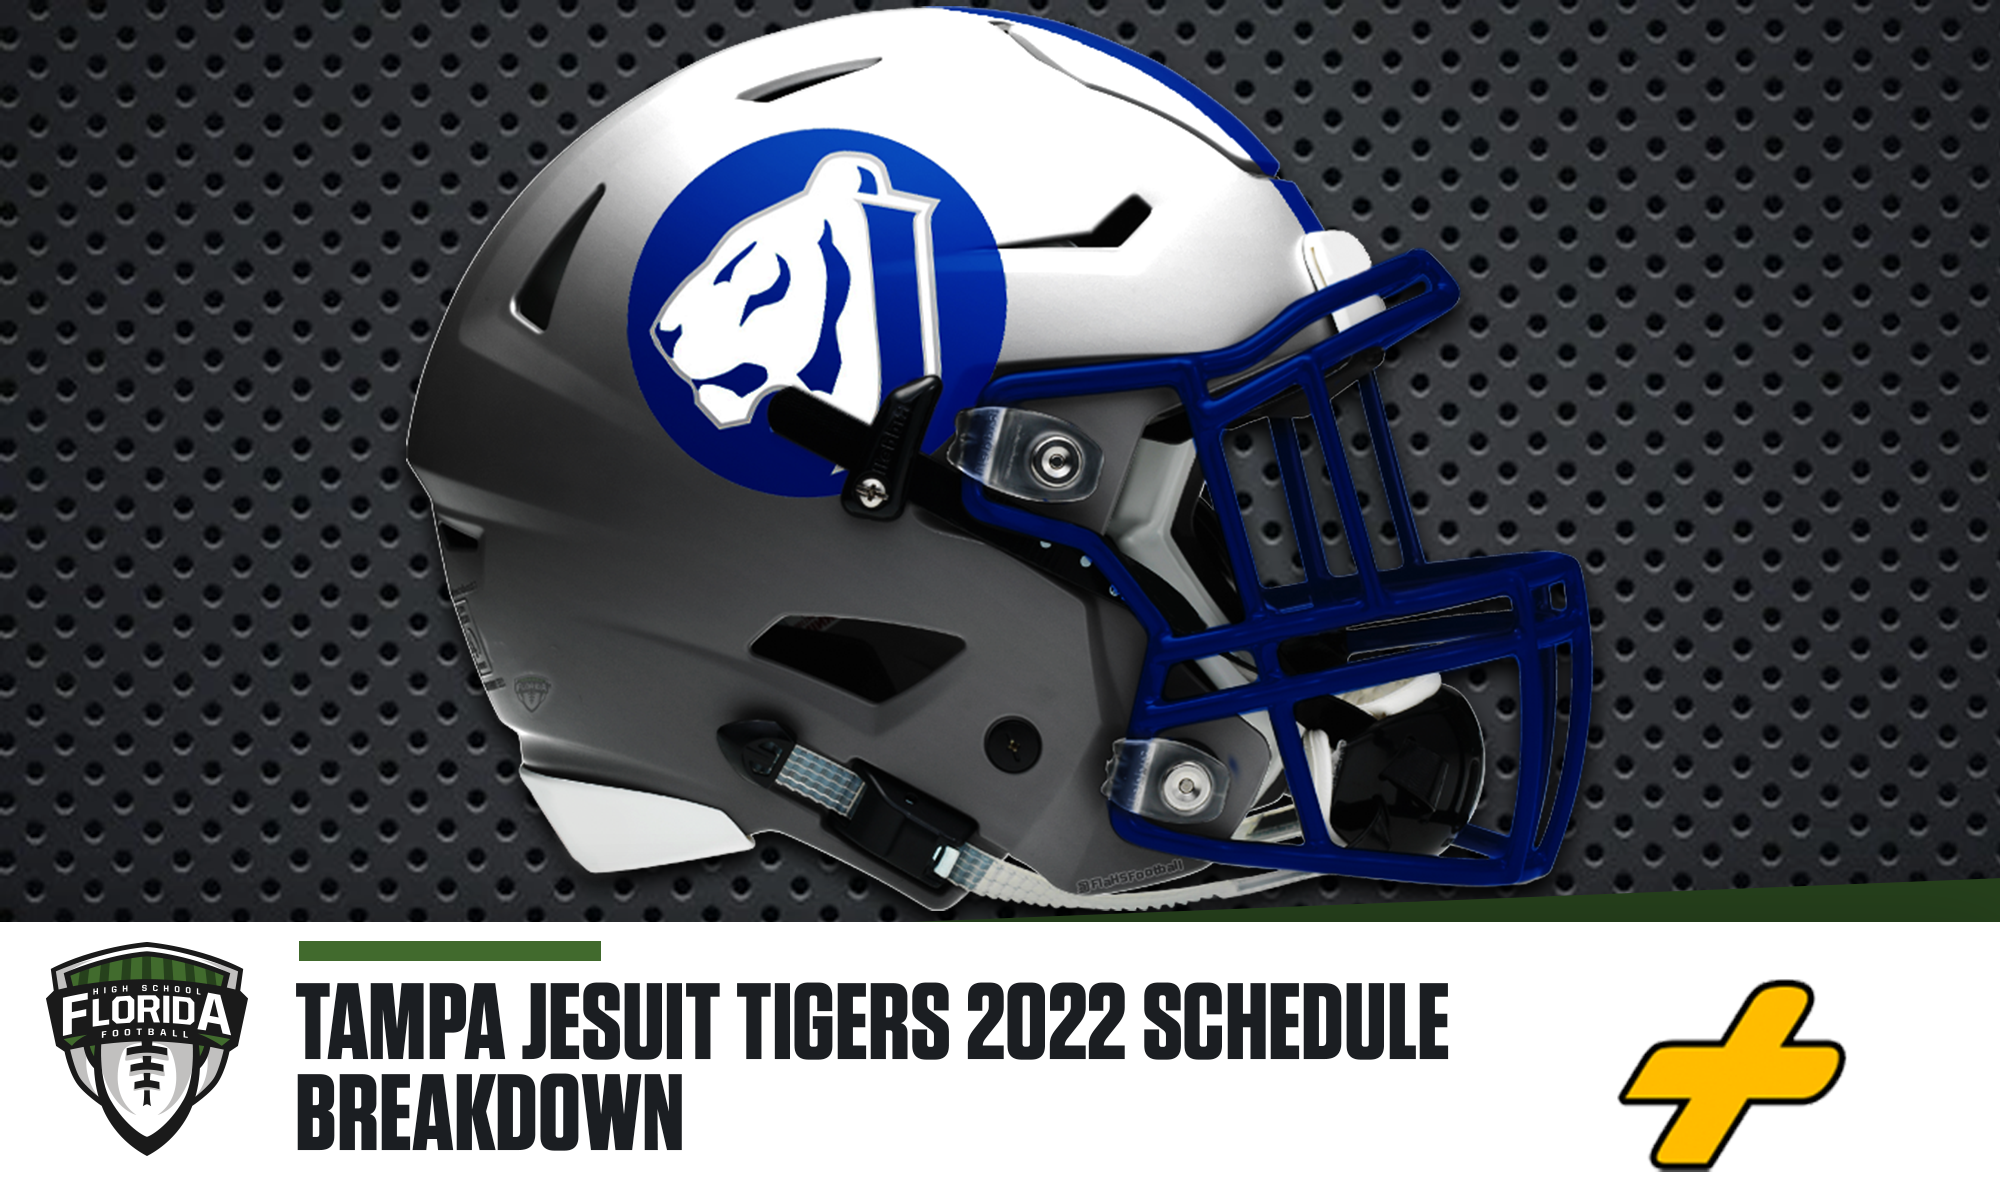 2022-schedule-breakdown-tampa-jesuit-looking-to-defend-state-championship-with-a-tougher-2022